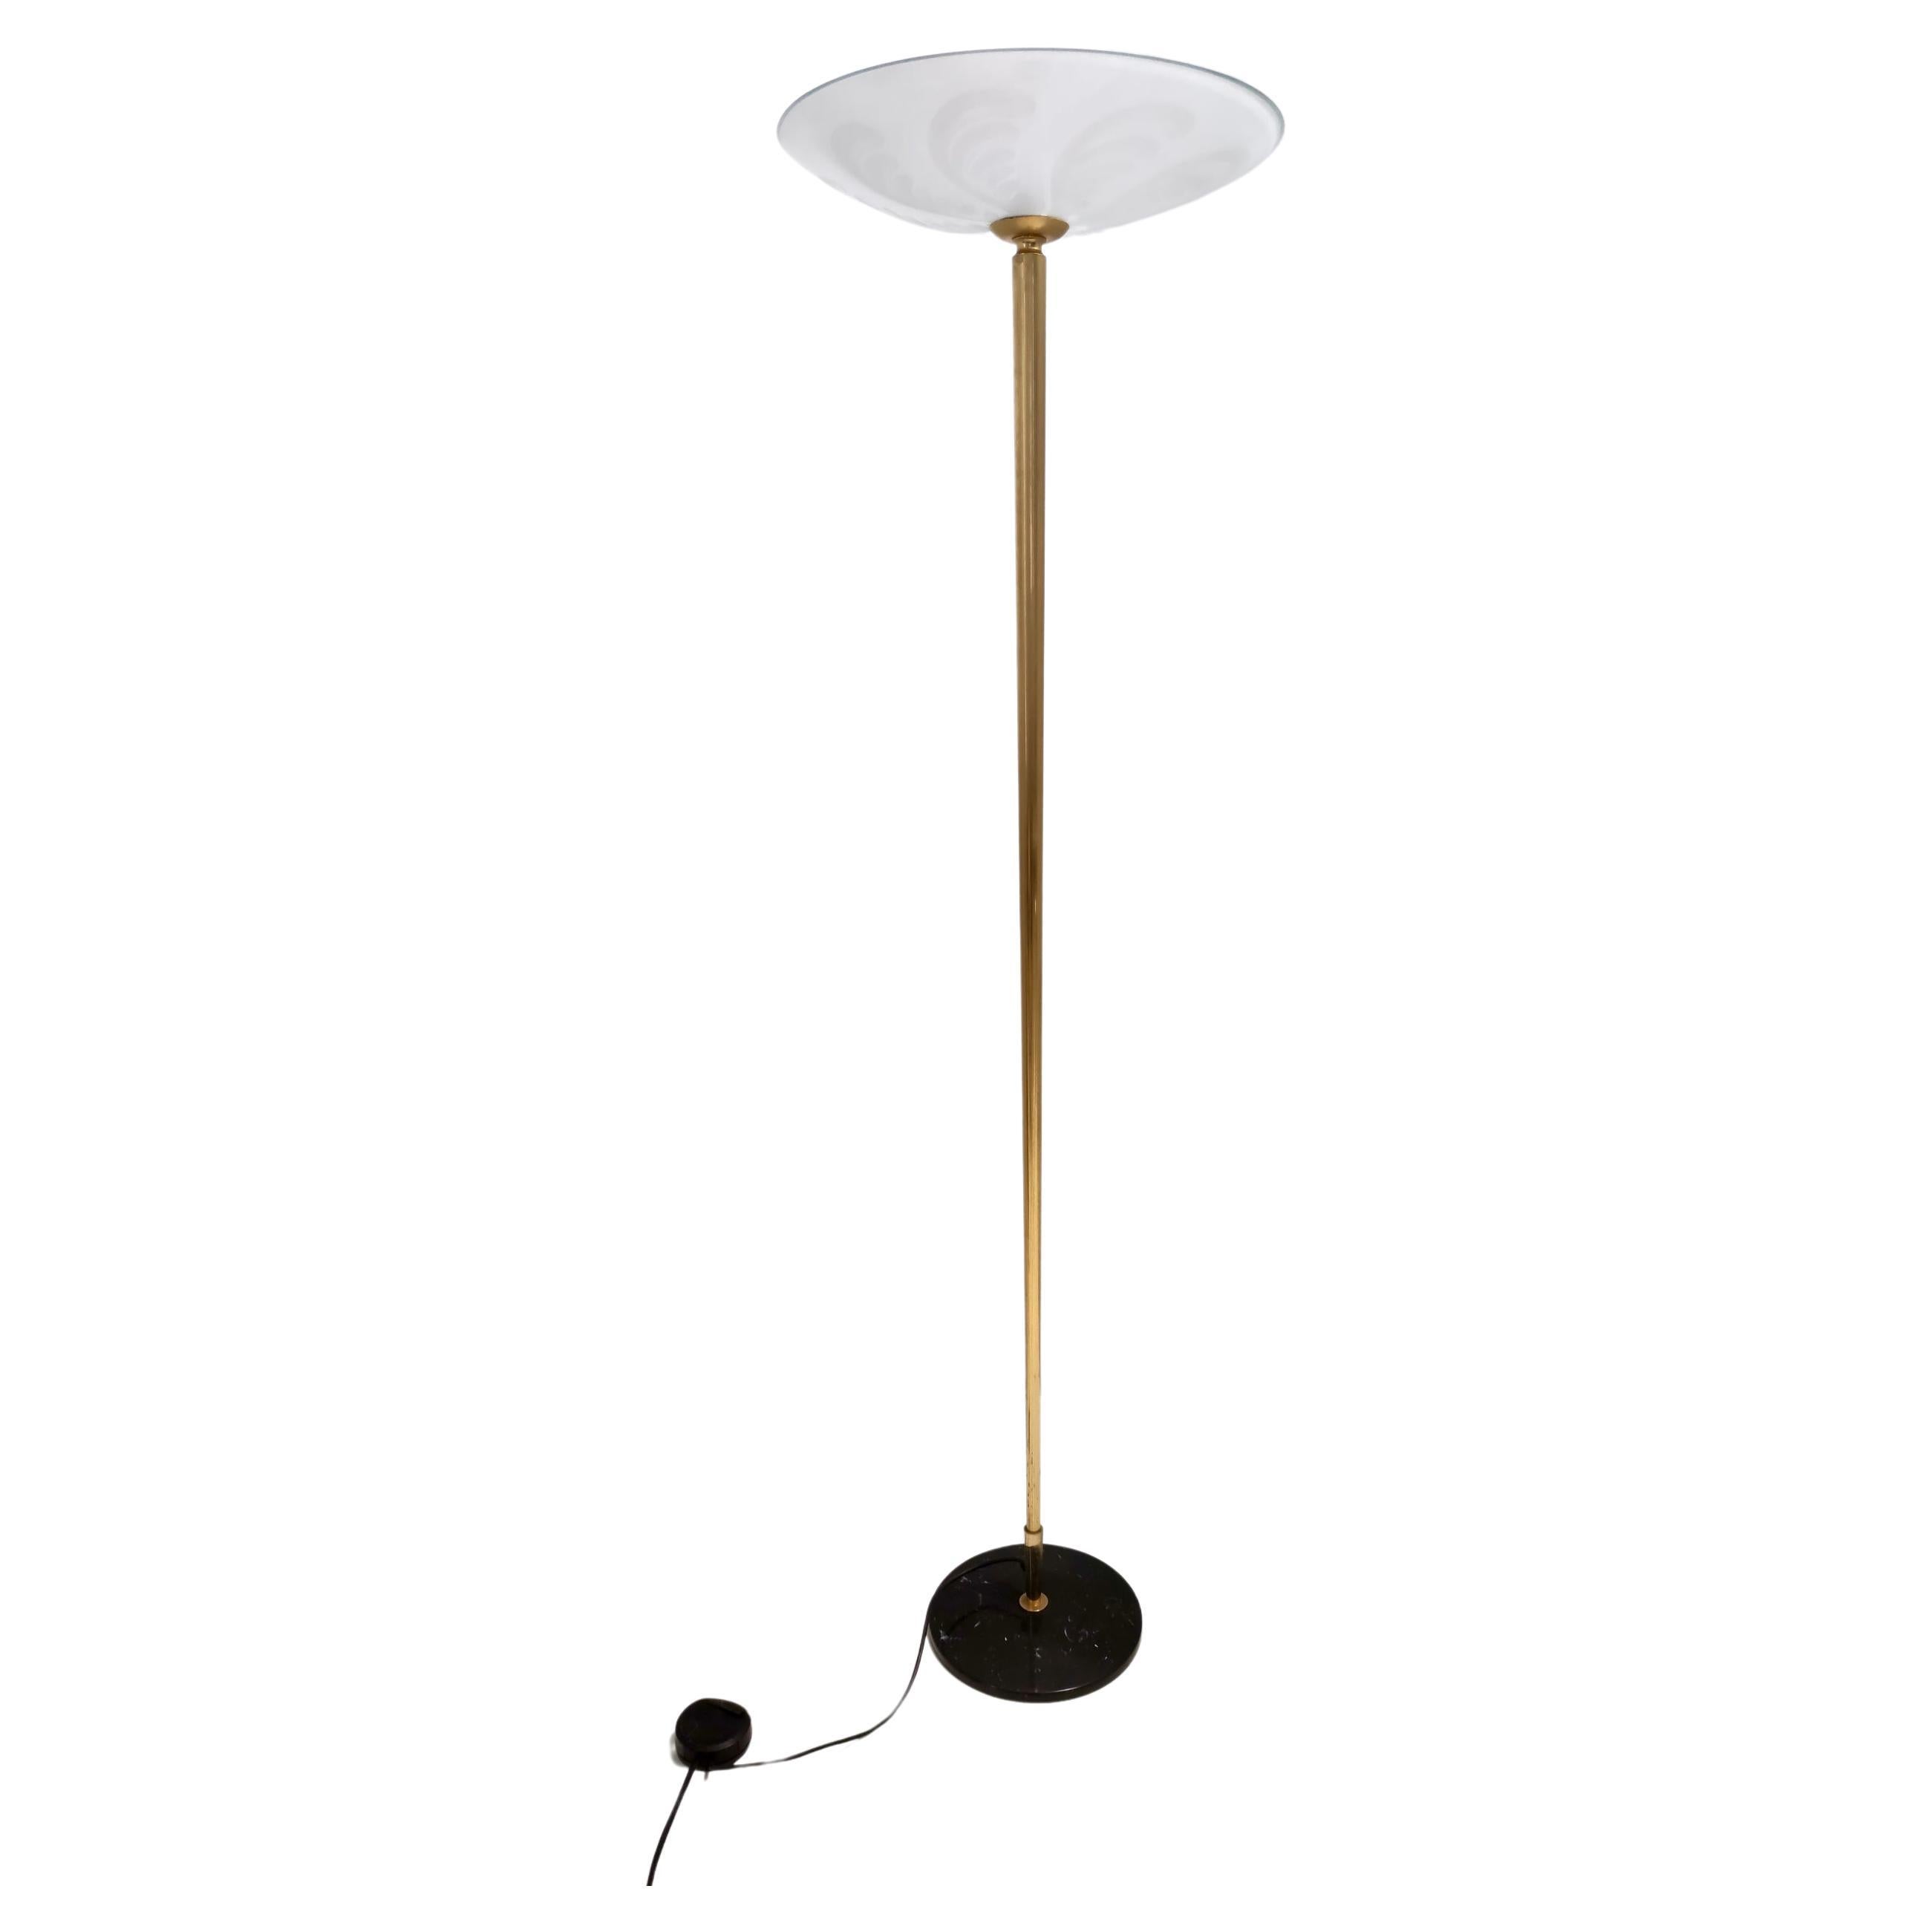 Brass and Etched Glass Floor Lamp in the style of Fontana Arte, Italy